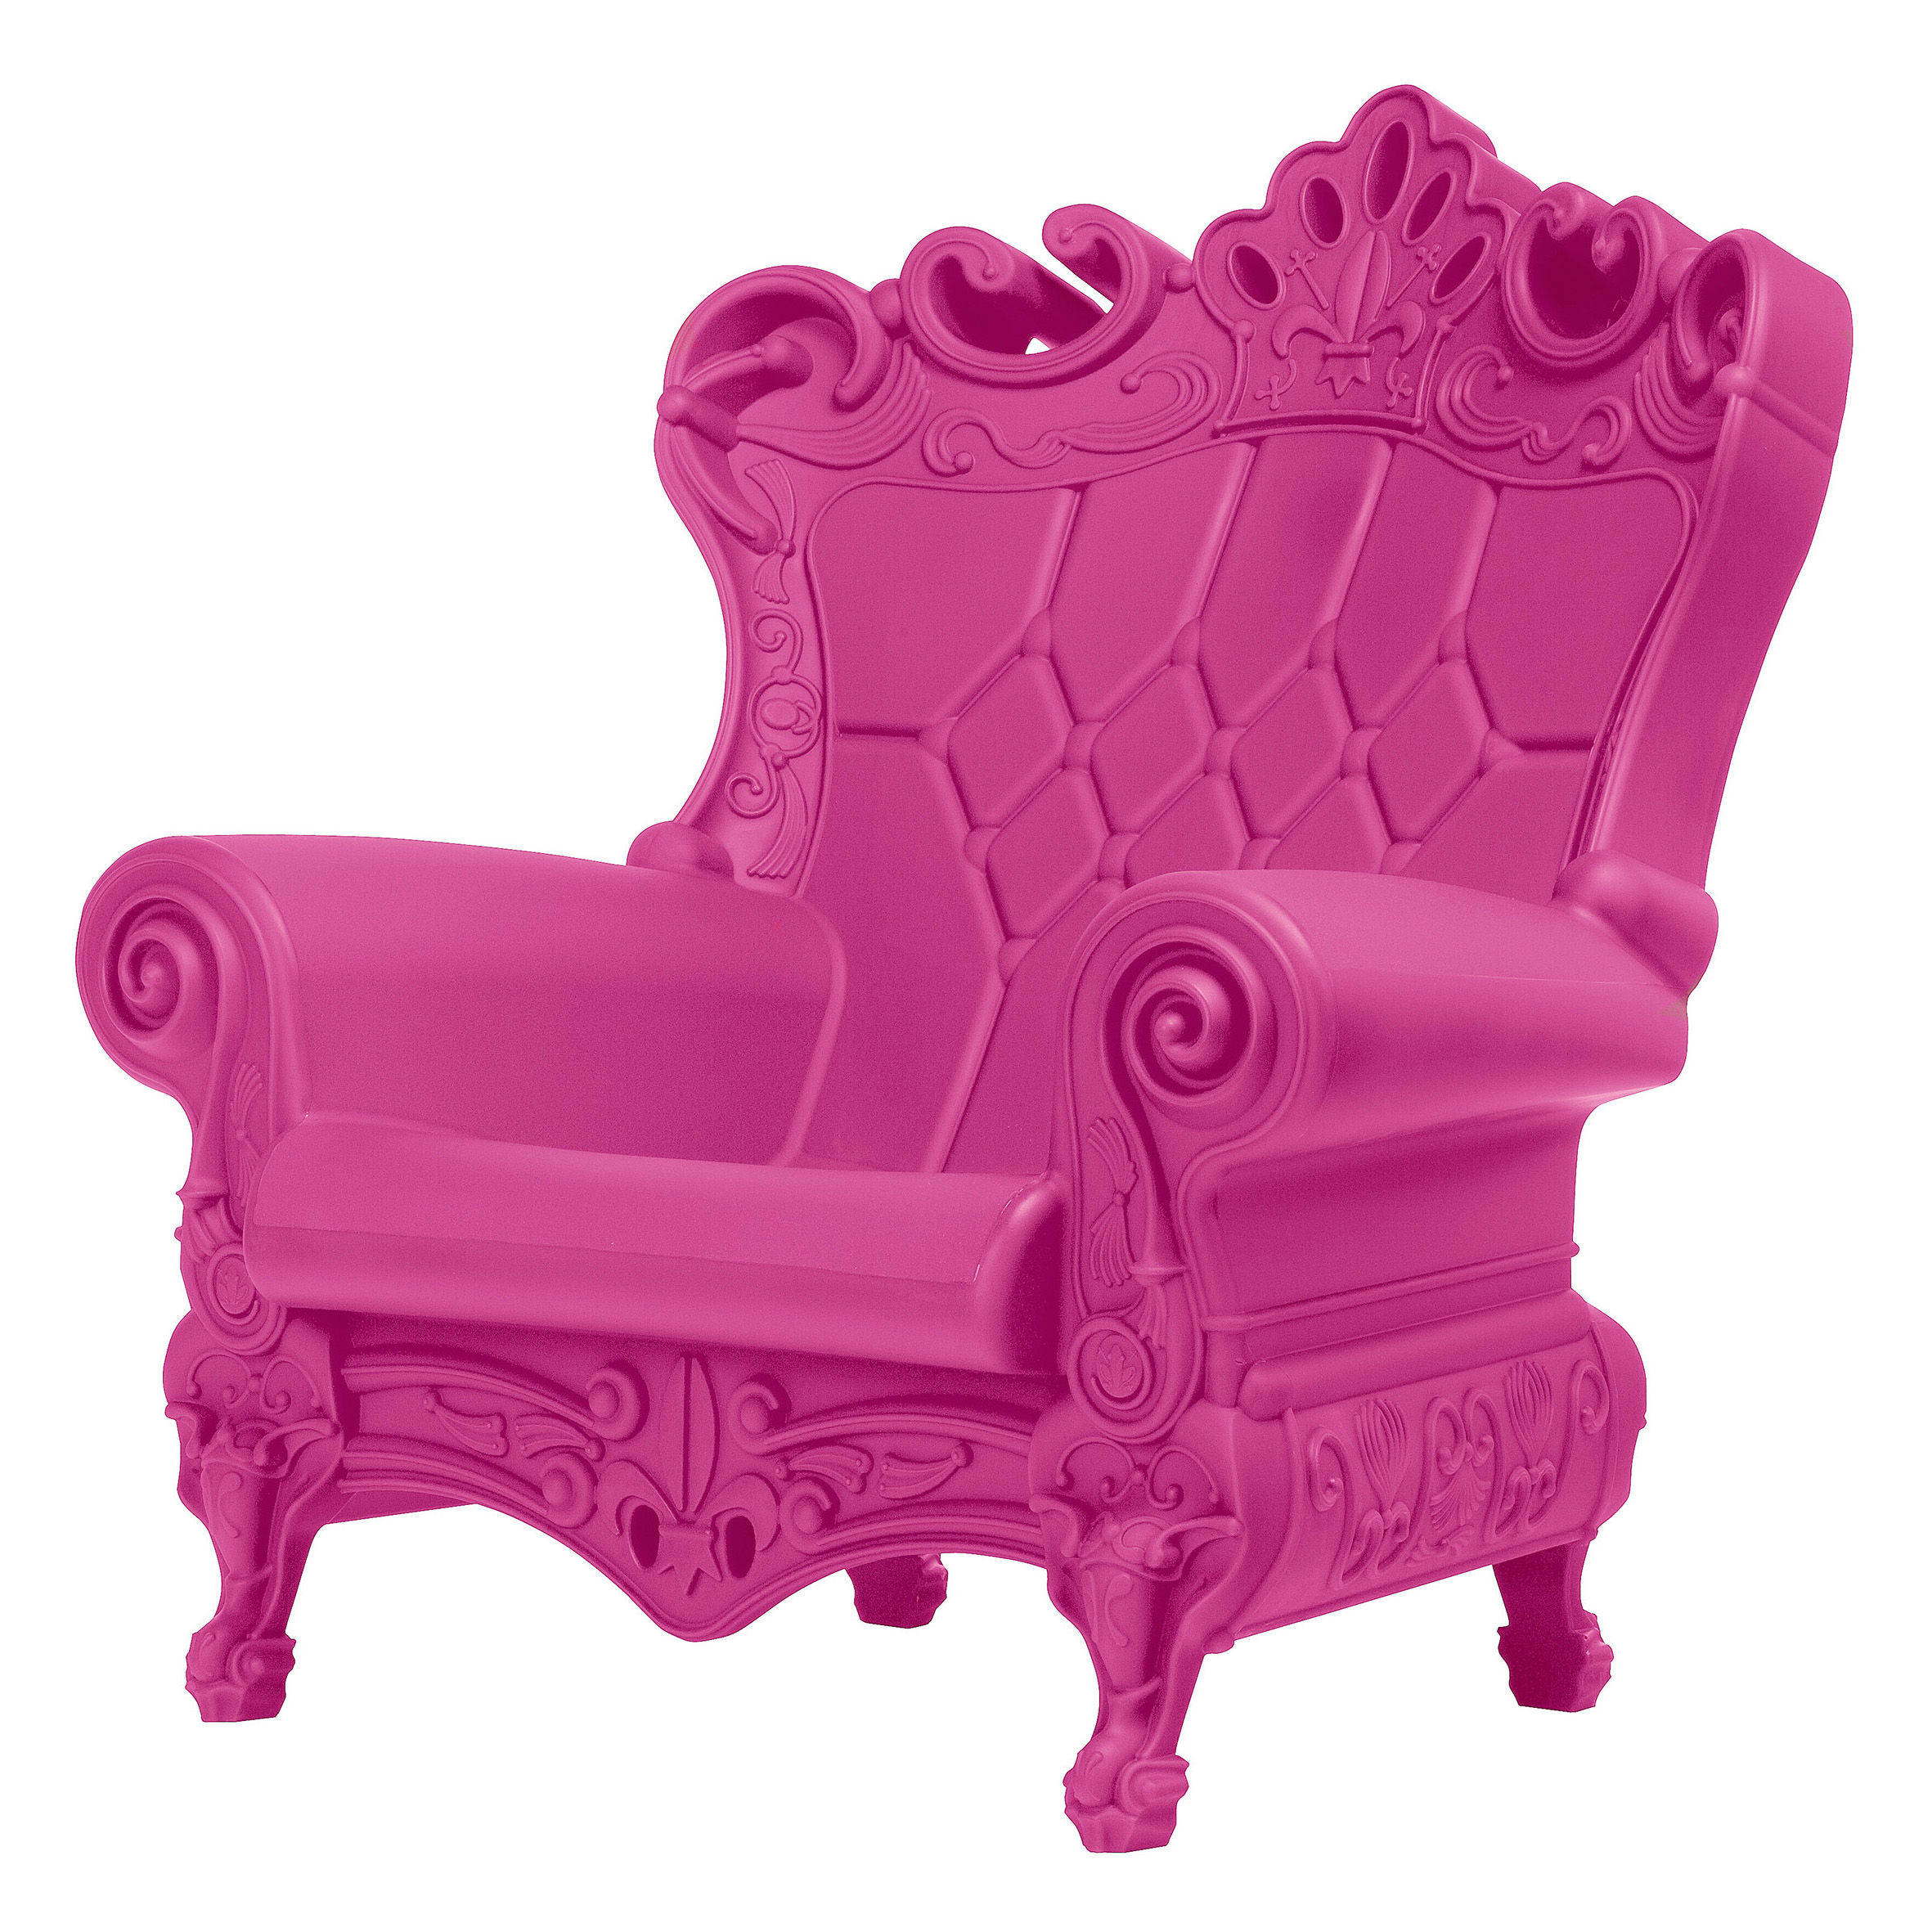 Queen Of Love Chair Knock Off